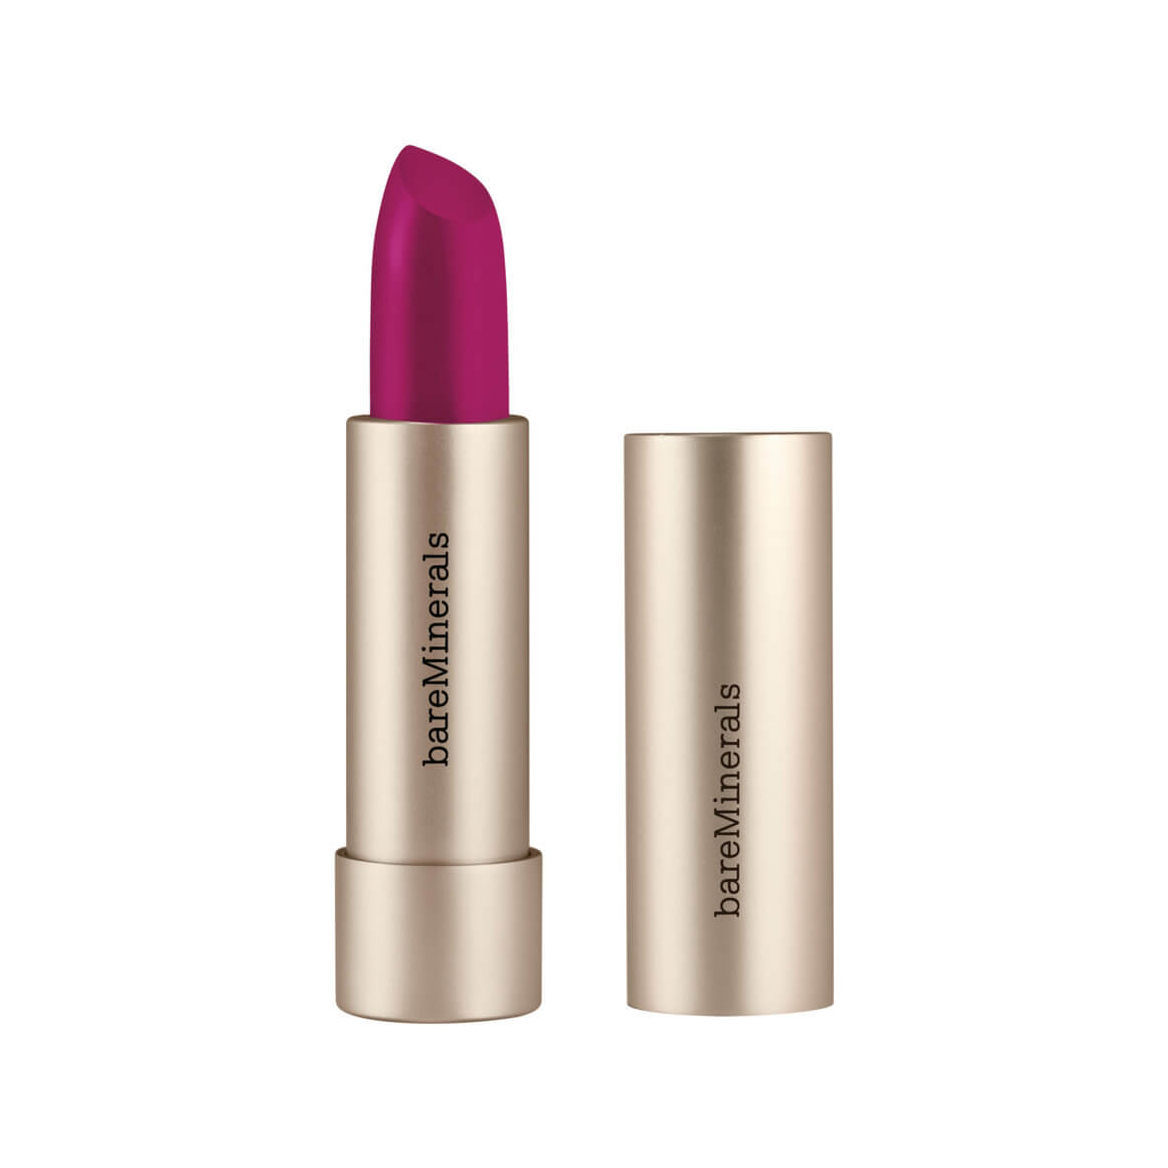 bareMinerals Mineralist Hydra-Smoothing Lipstick in Wisdom, $32, available at mecca.com.au